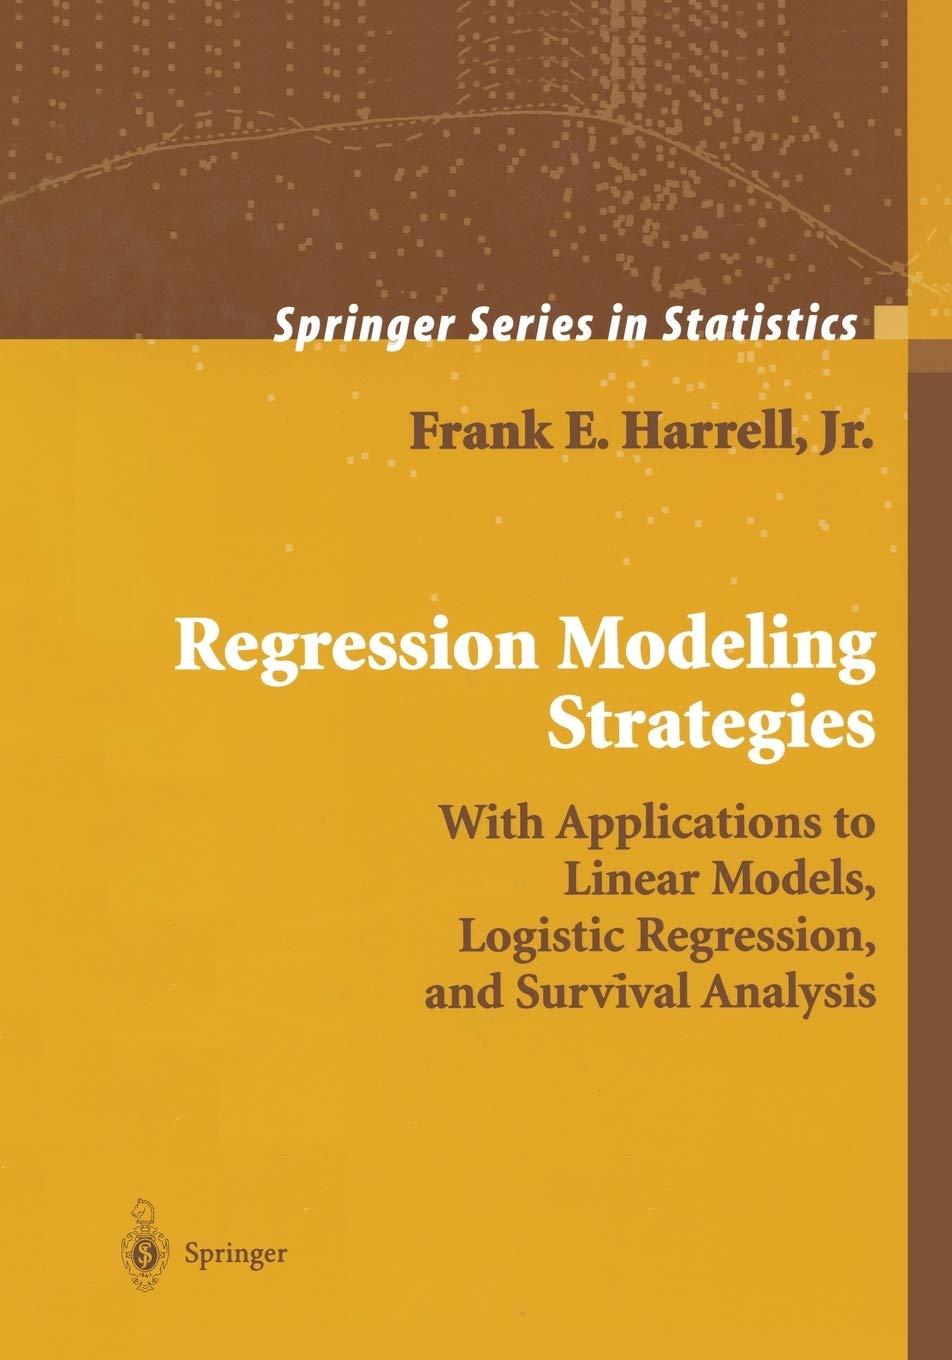 regression modeling strategies with applications to linear models logistic regression and survival analysis